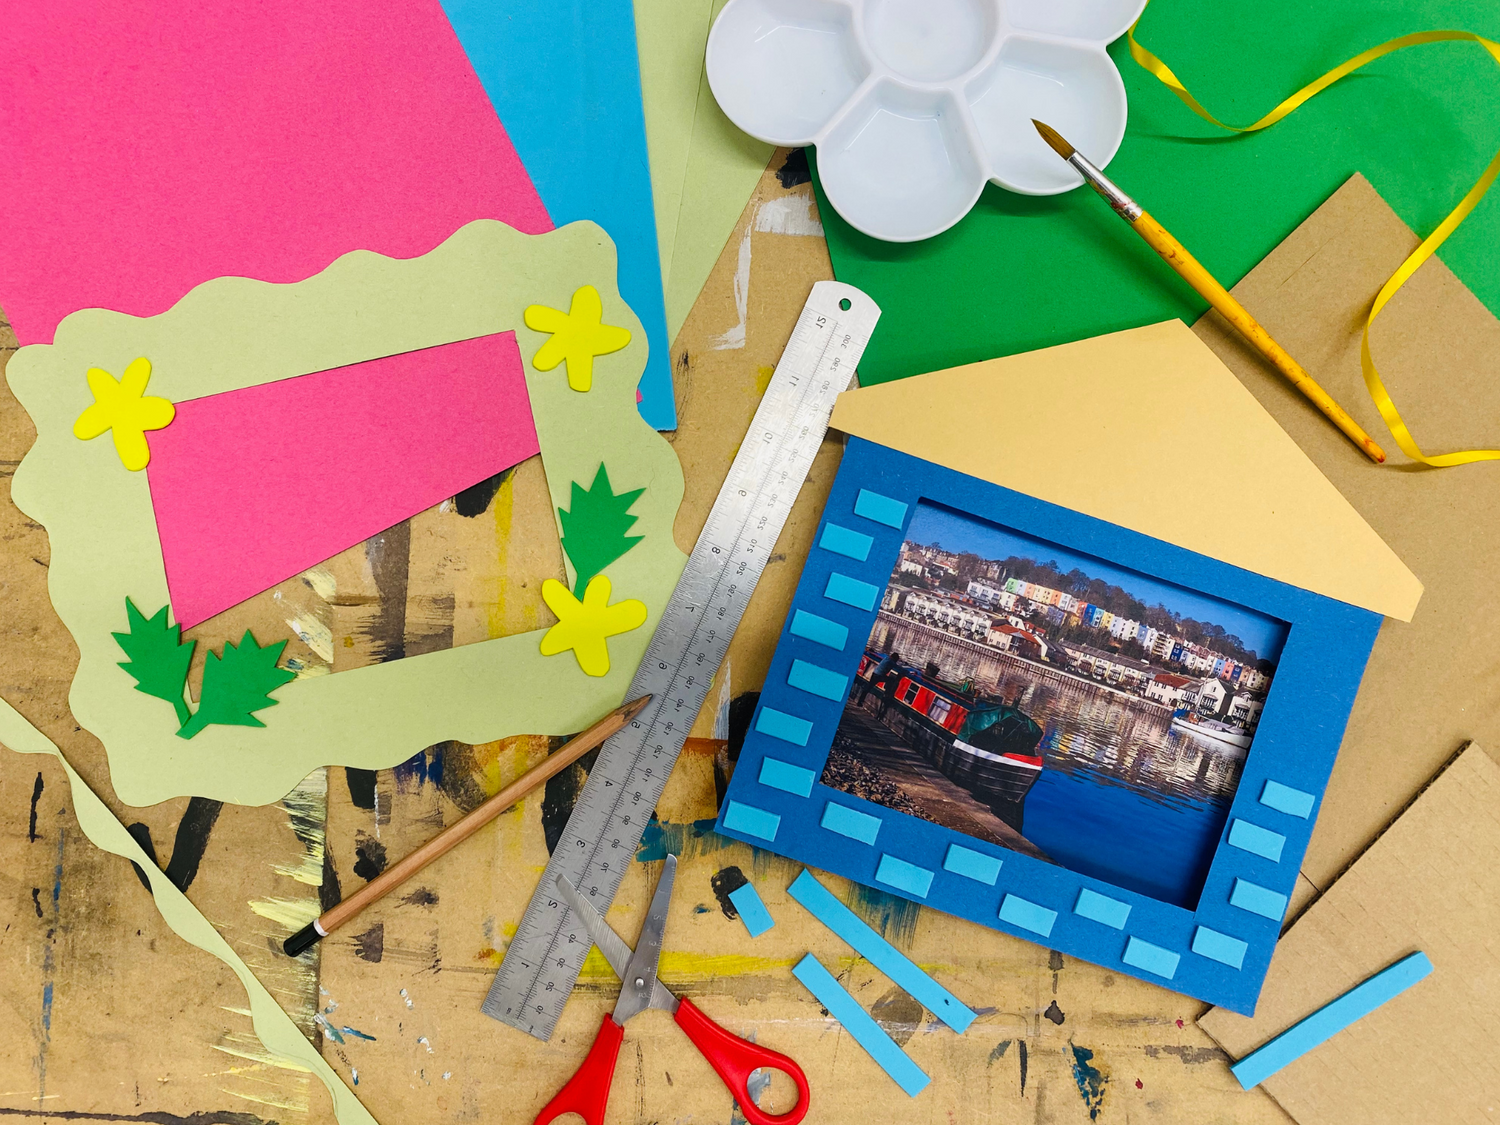 A craft table scattered with materials to make picture frames. There are plies of different coloured card across the top of the image, a paint palette, paint brush and some yellow ribbon in the top right corner, and some scissors, a pencil and a metal ruler in the centre. 